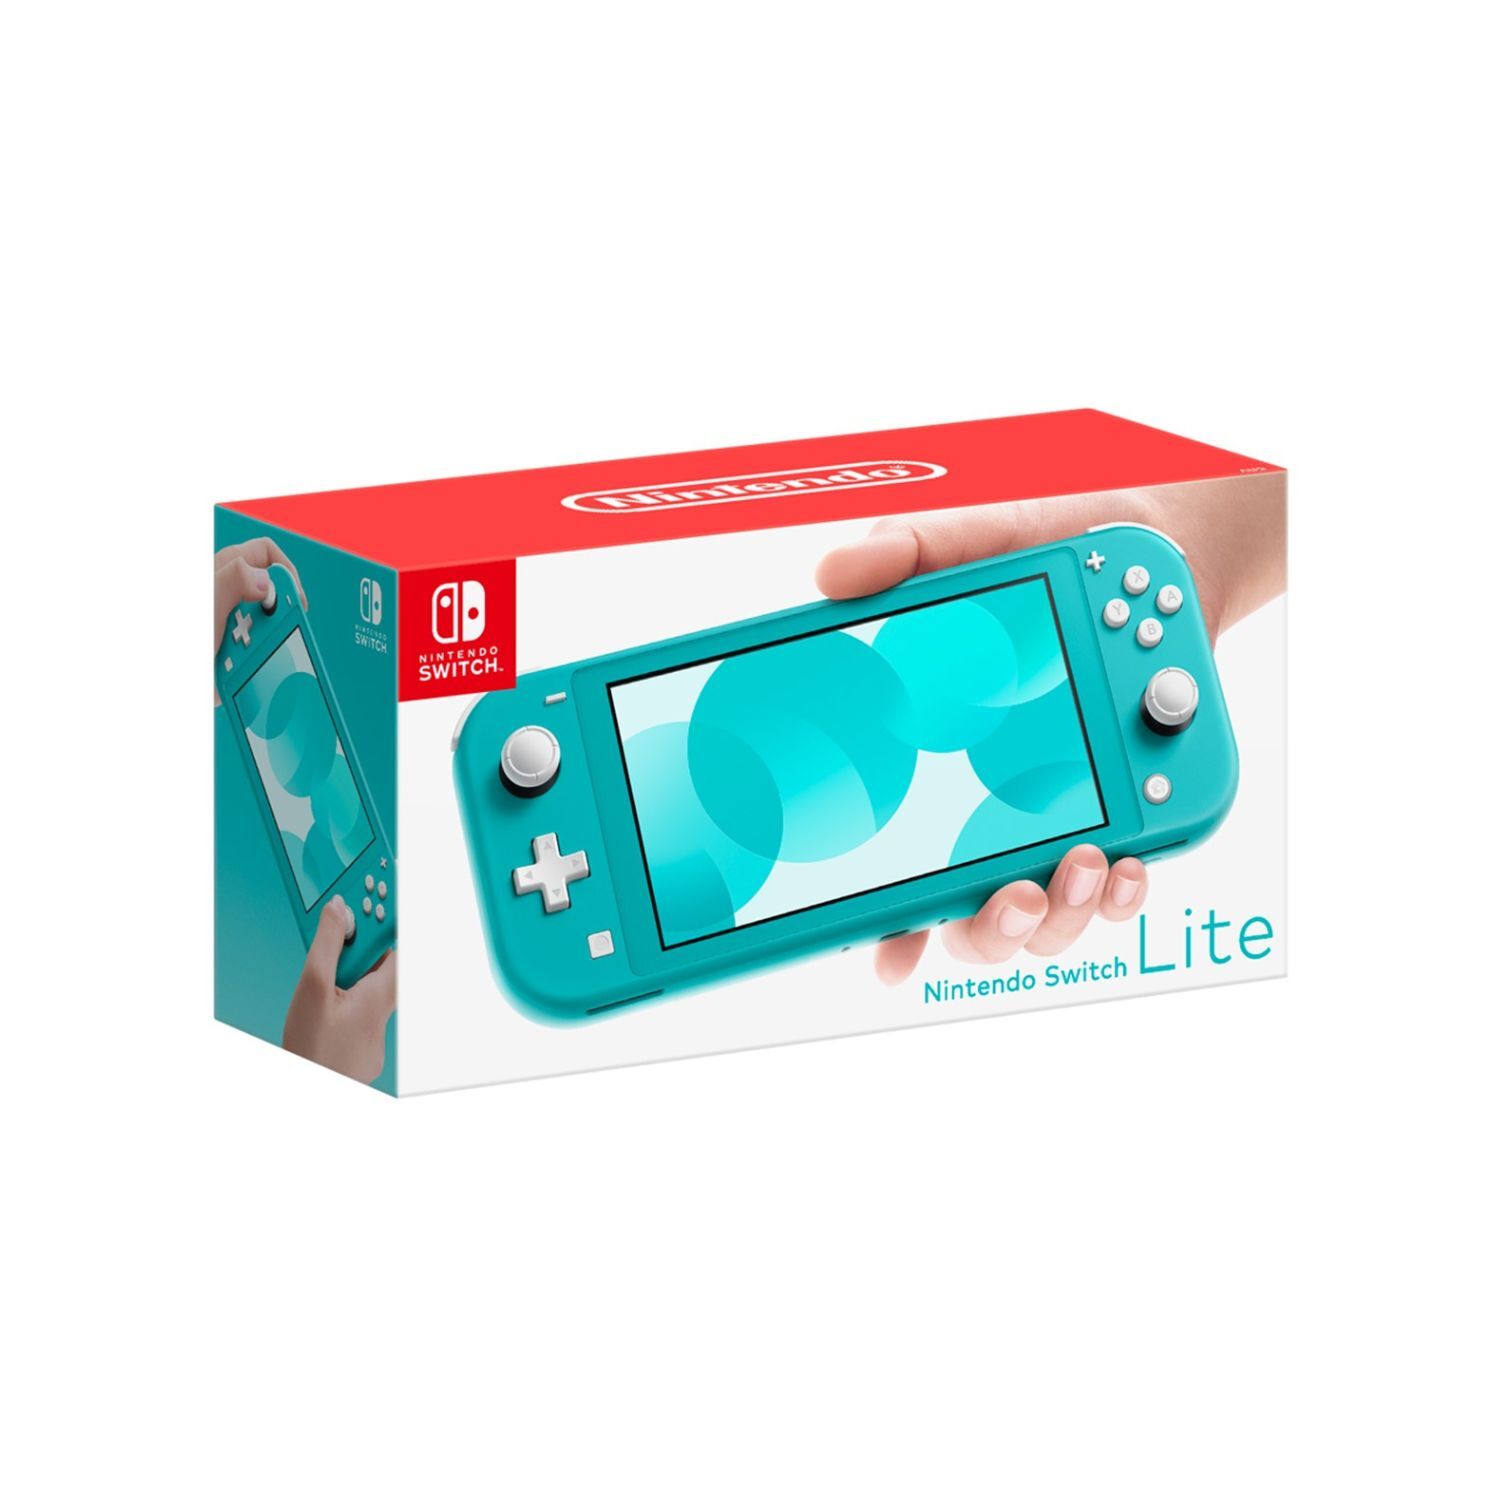 Nintendo Switch Lite Turquoise - TV and audio visual